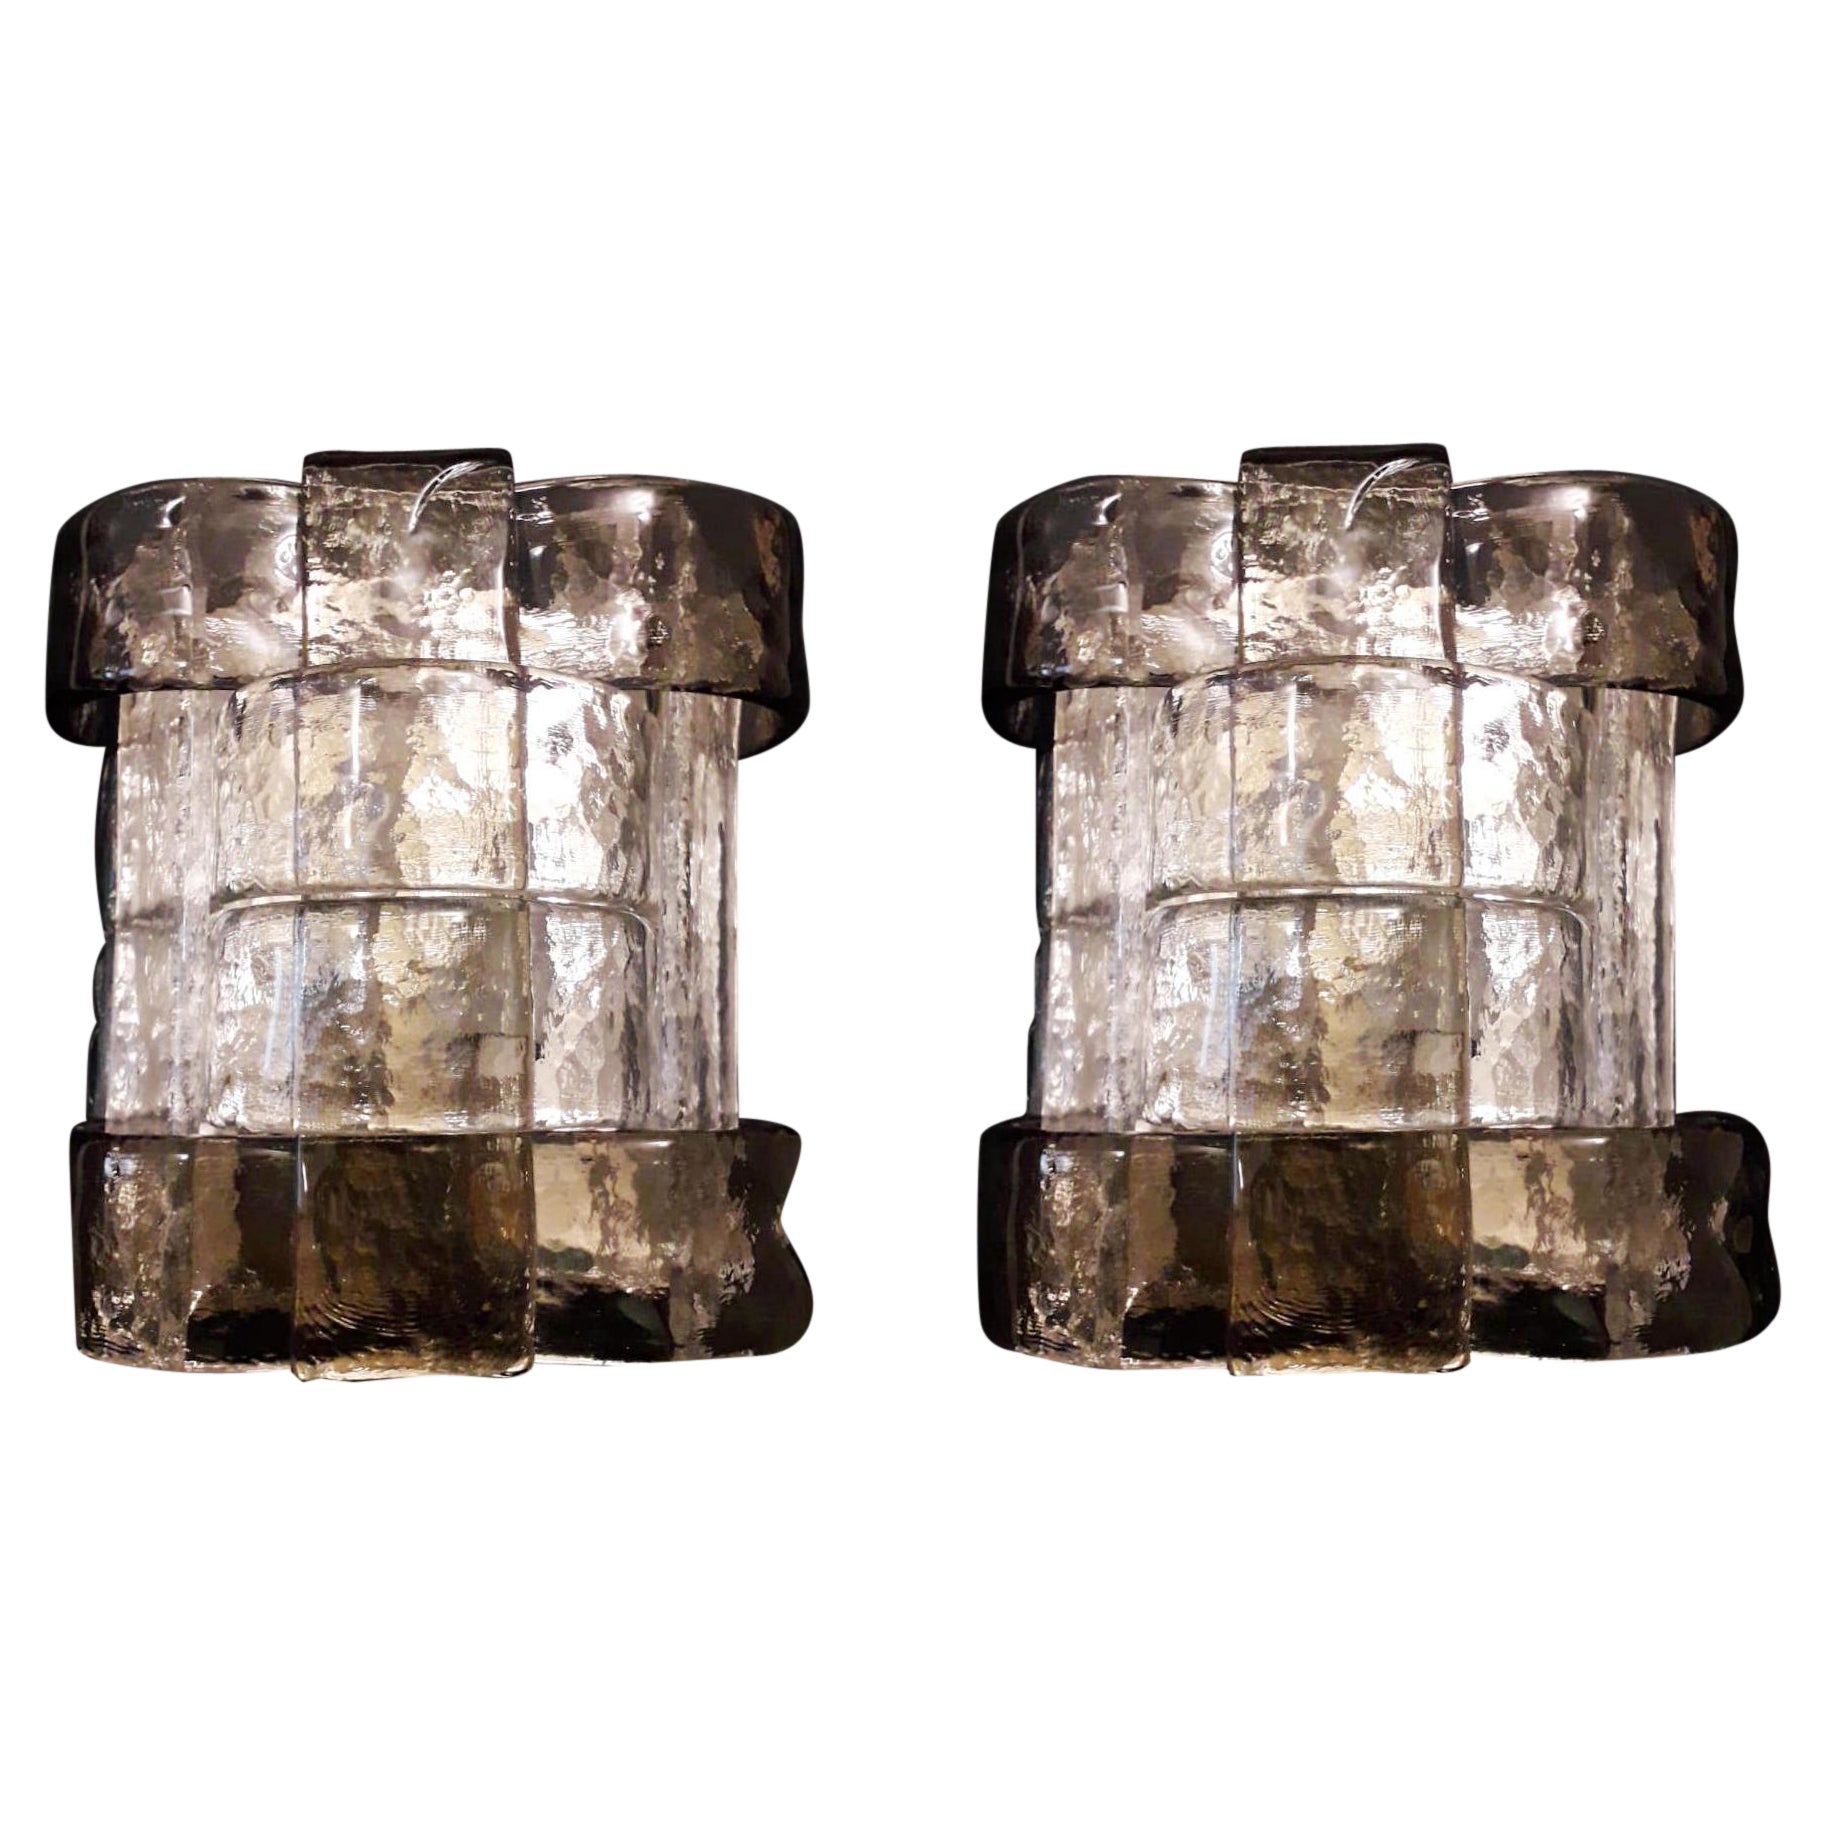 Pair of Curved Murano Glass Sconces by Mazzega